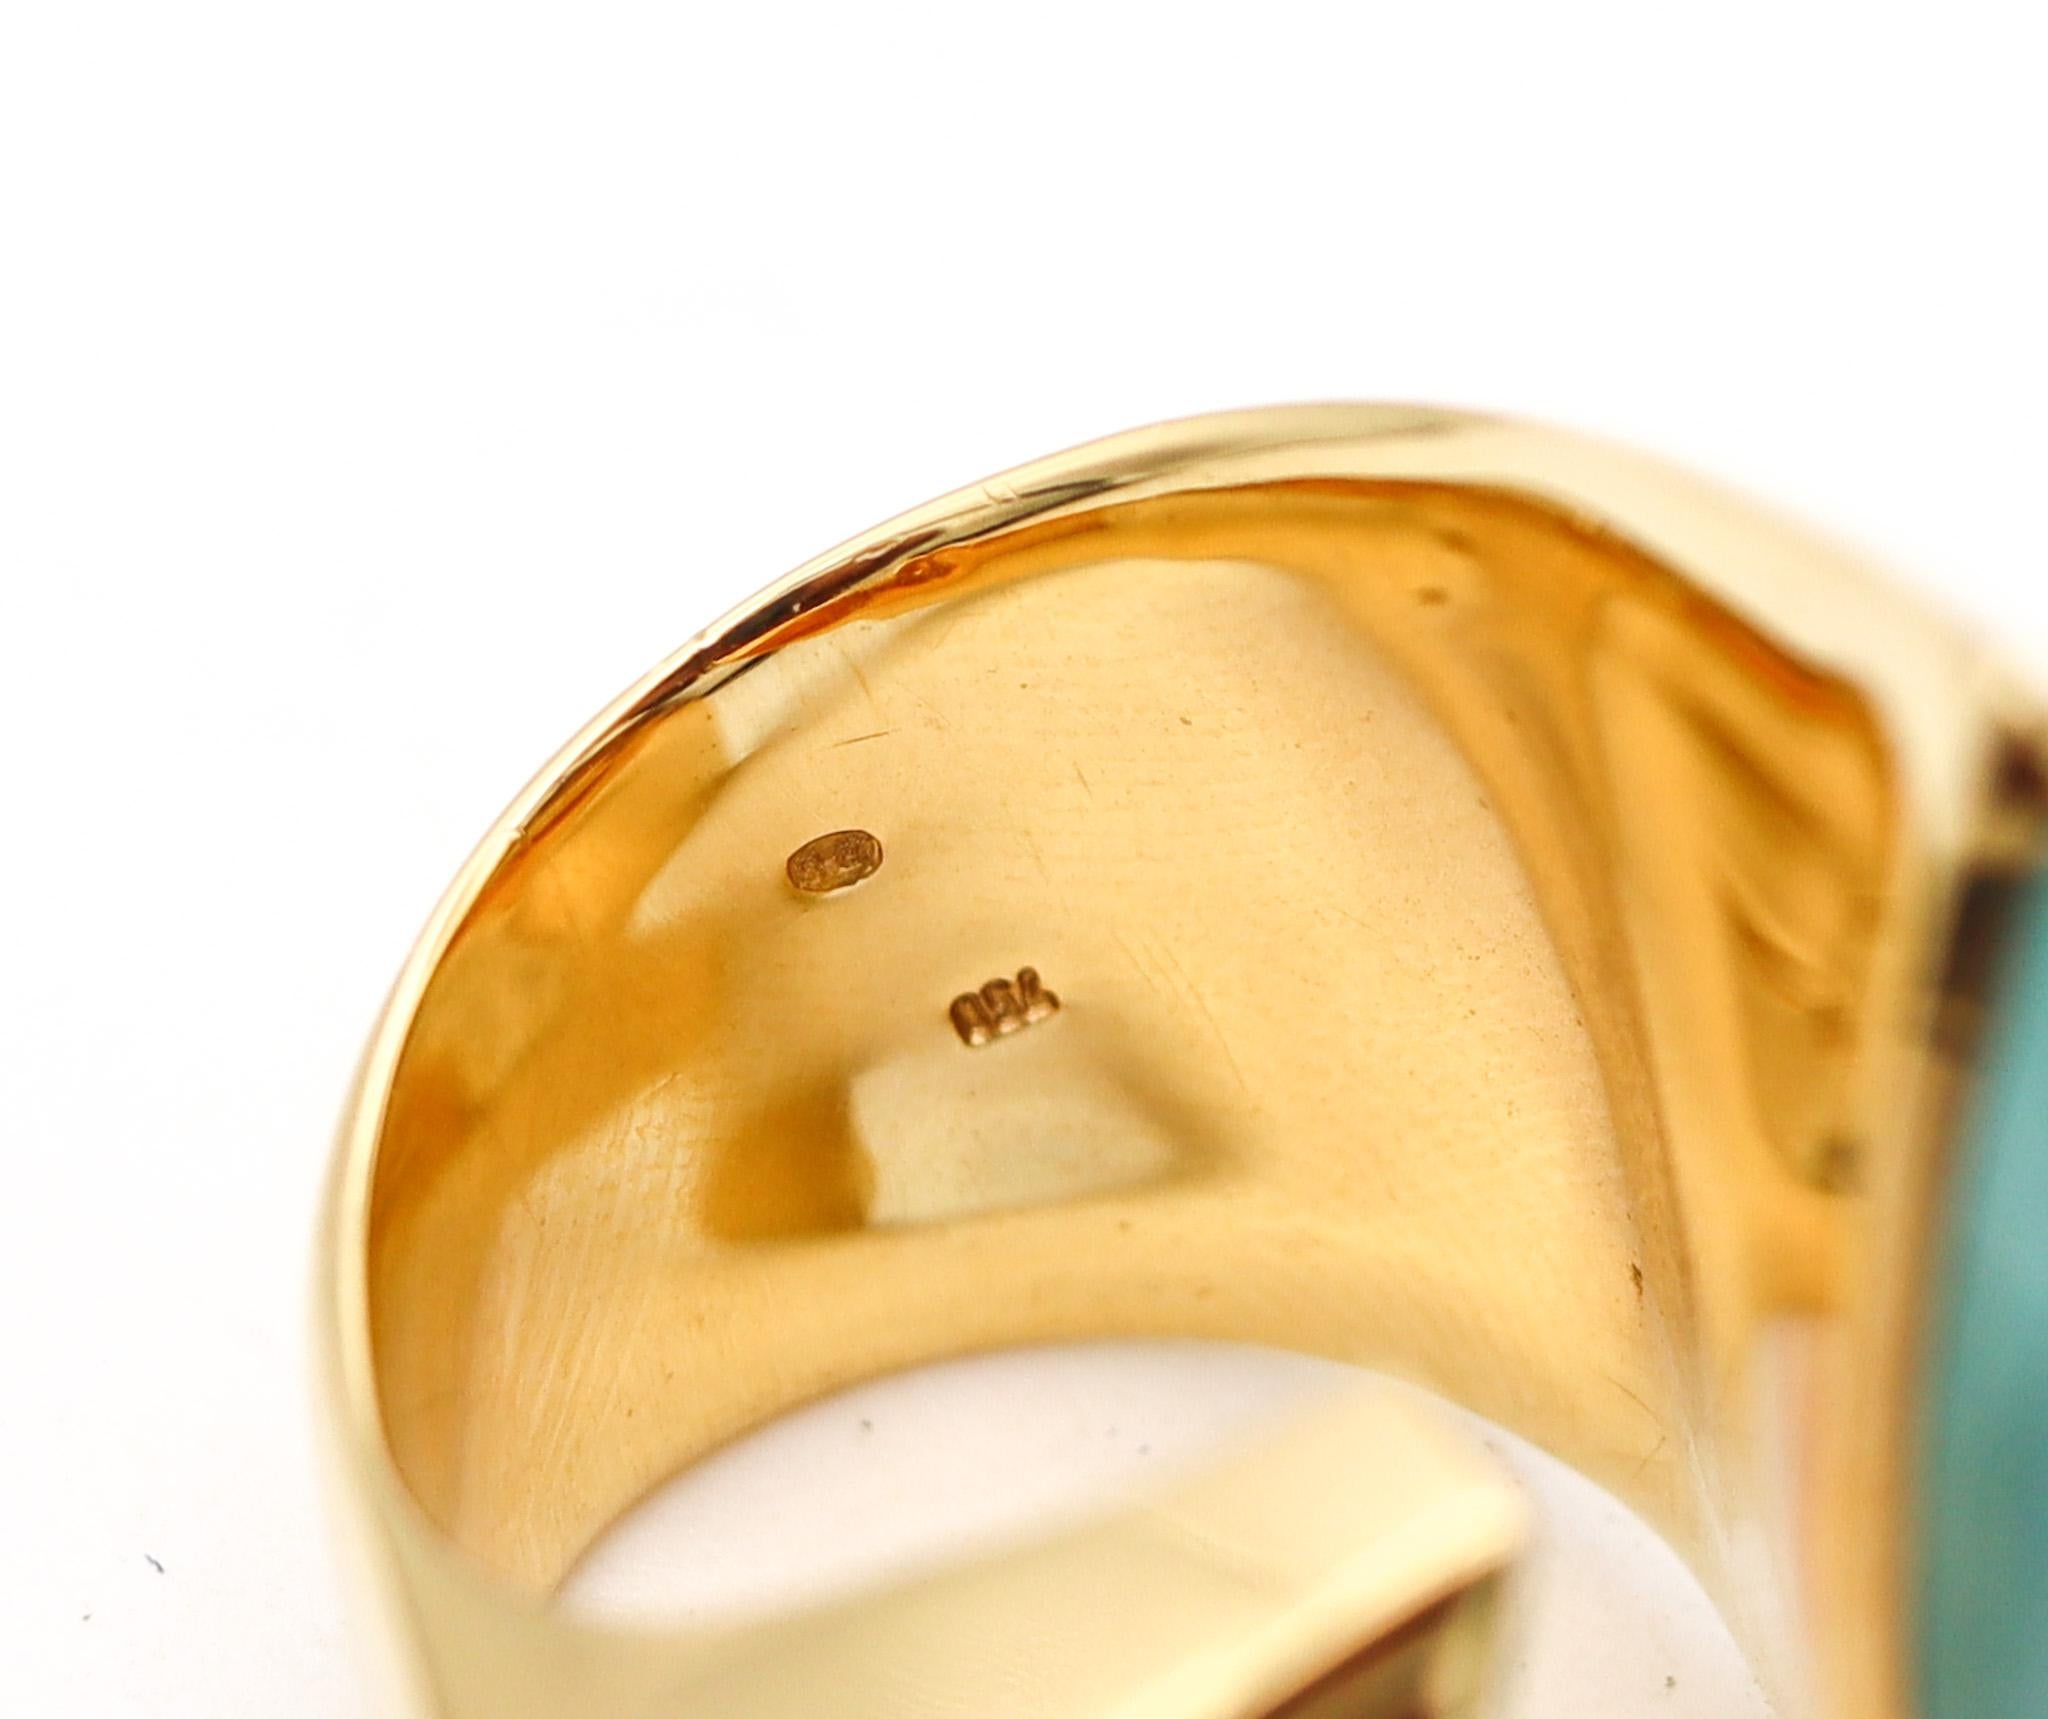 Italian Modernist Bypass Ring In 18Kt Yellow Gold 8.14 Ctw Turquoise And Citrine For Sale 1